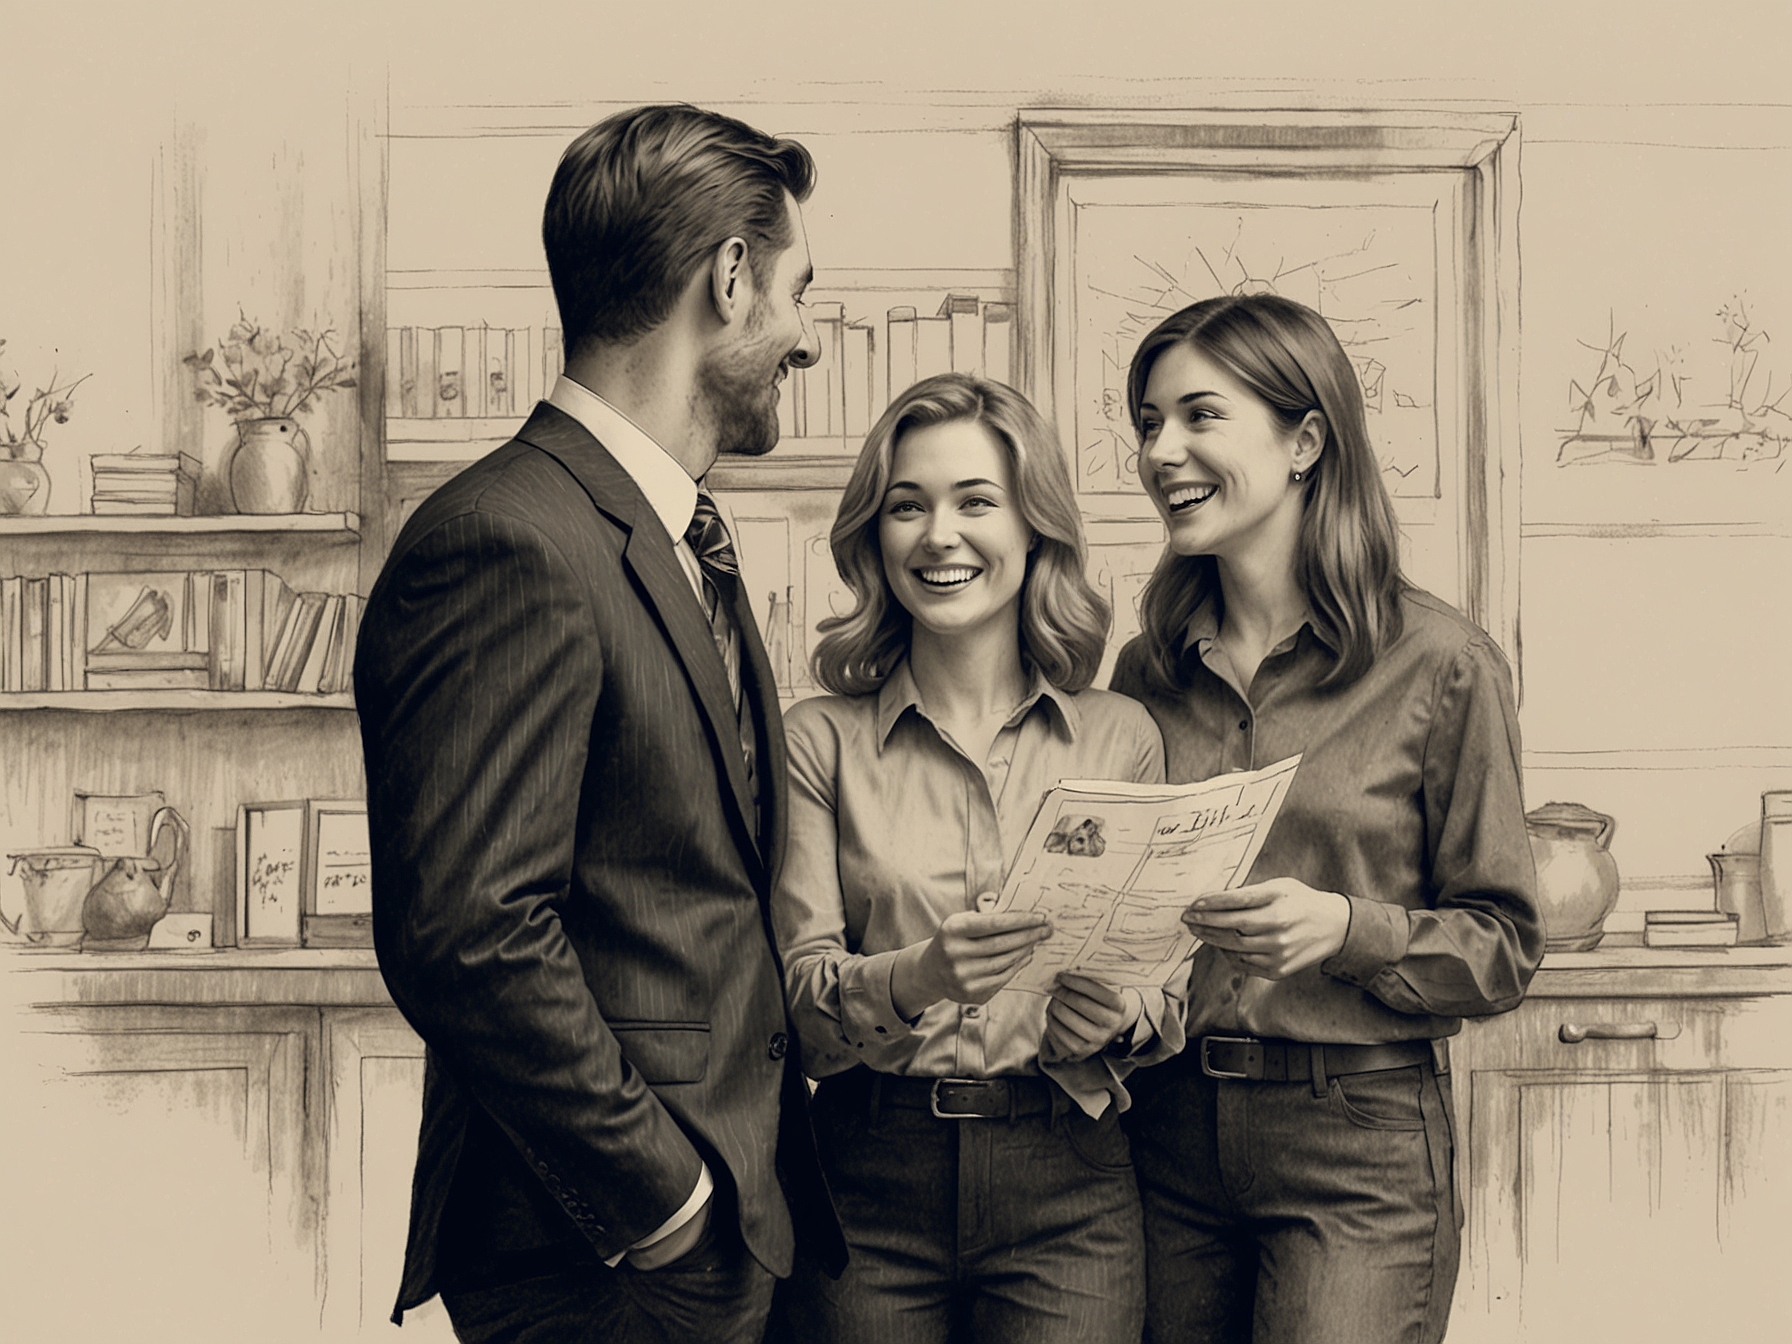 A smiling couple consulting with a mortgage advisor, highlighting the potential benefits of refinancing or securing a mortgage at lower rates, reflecting the article's focus on financial opportunities.